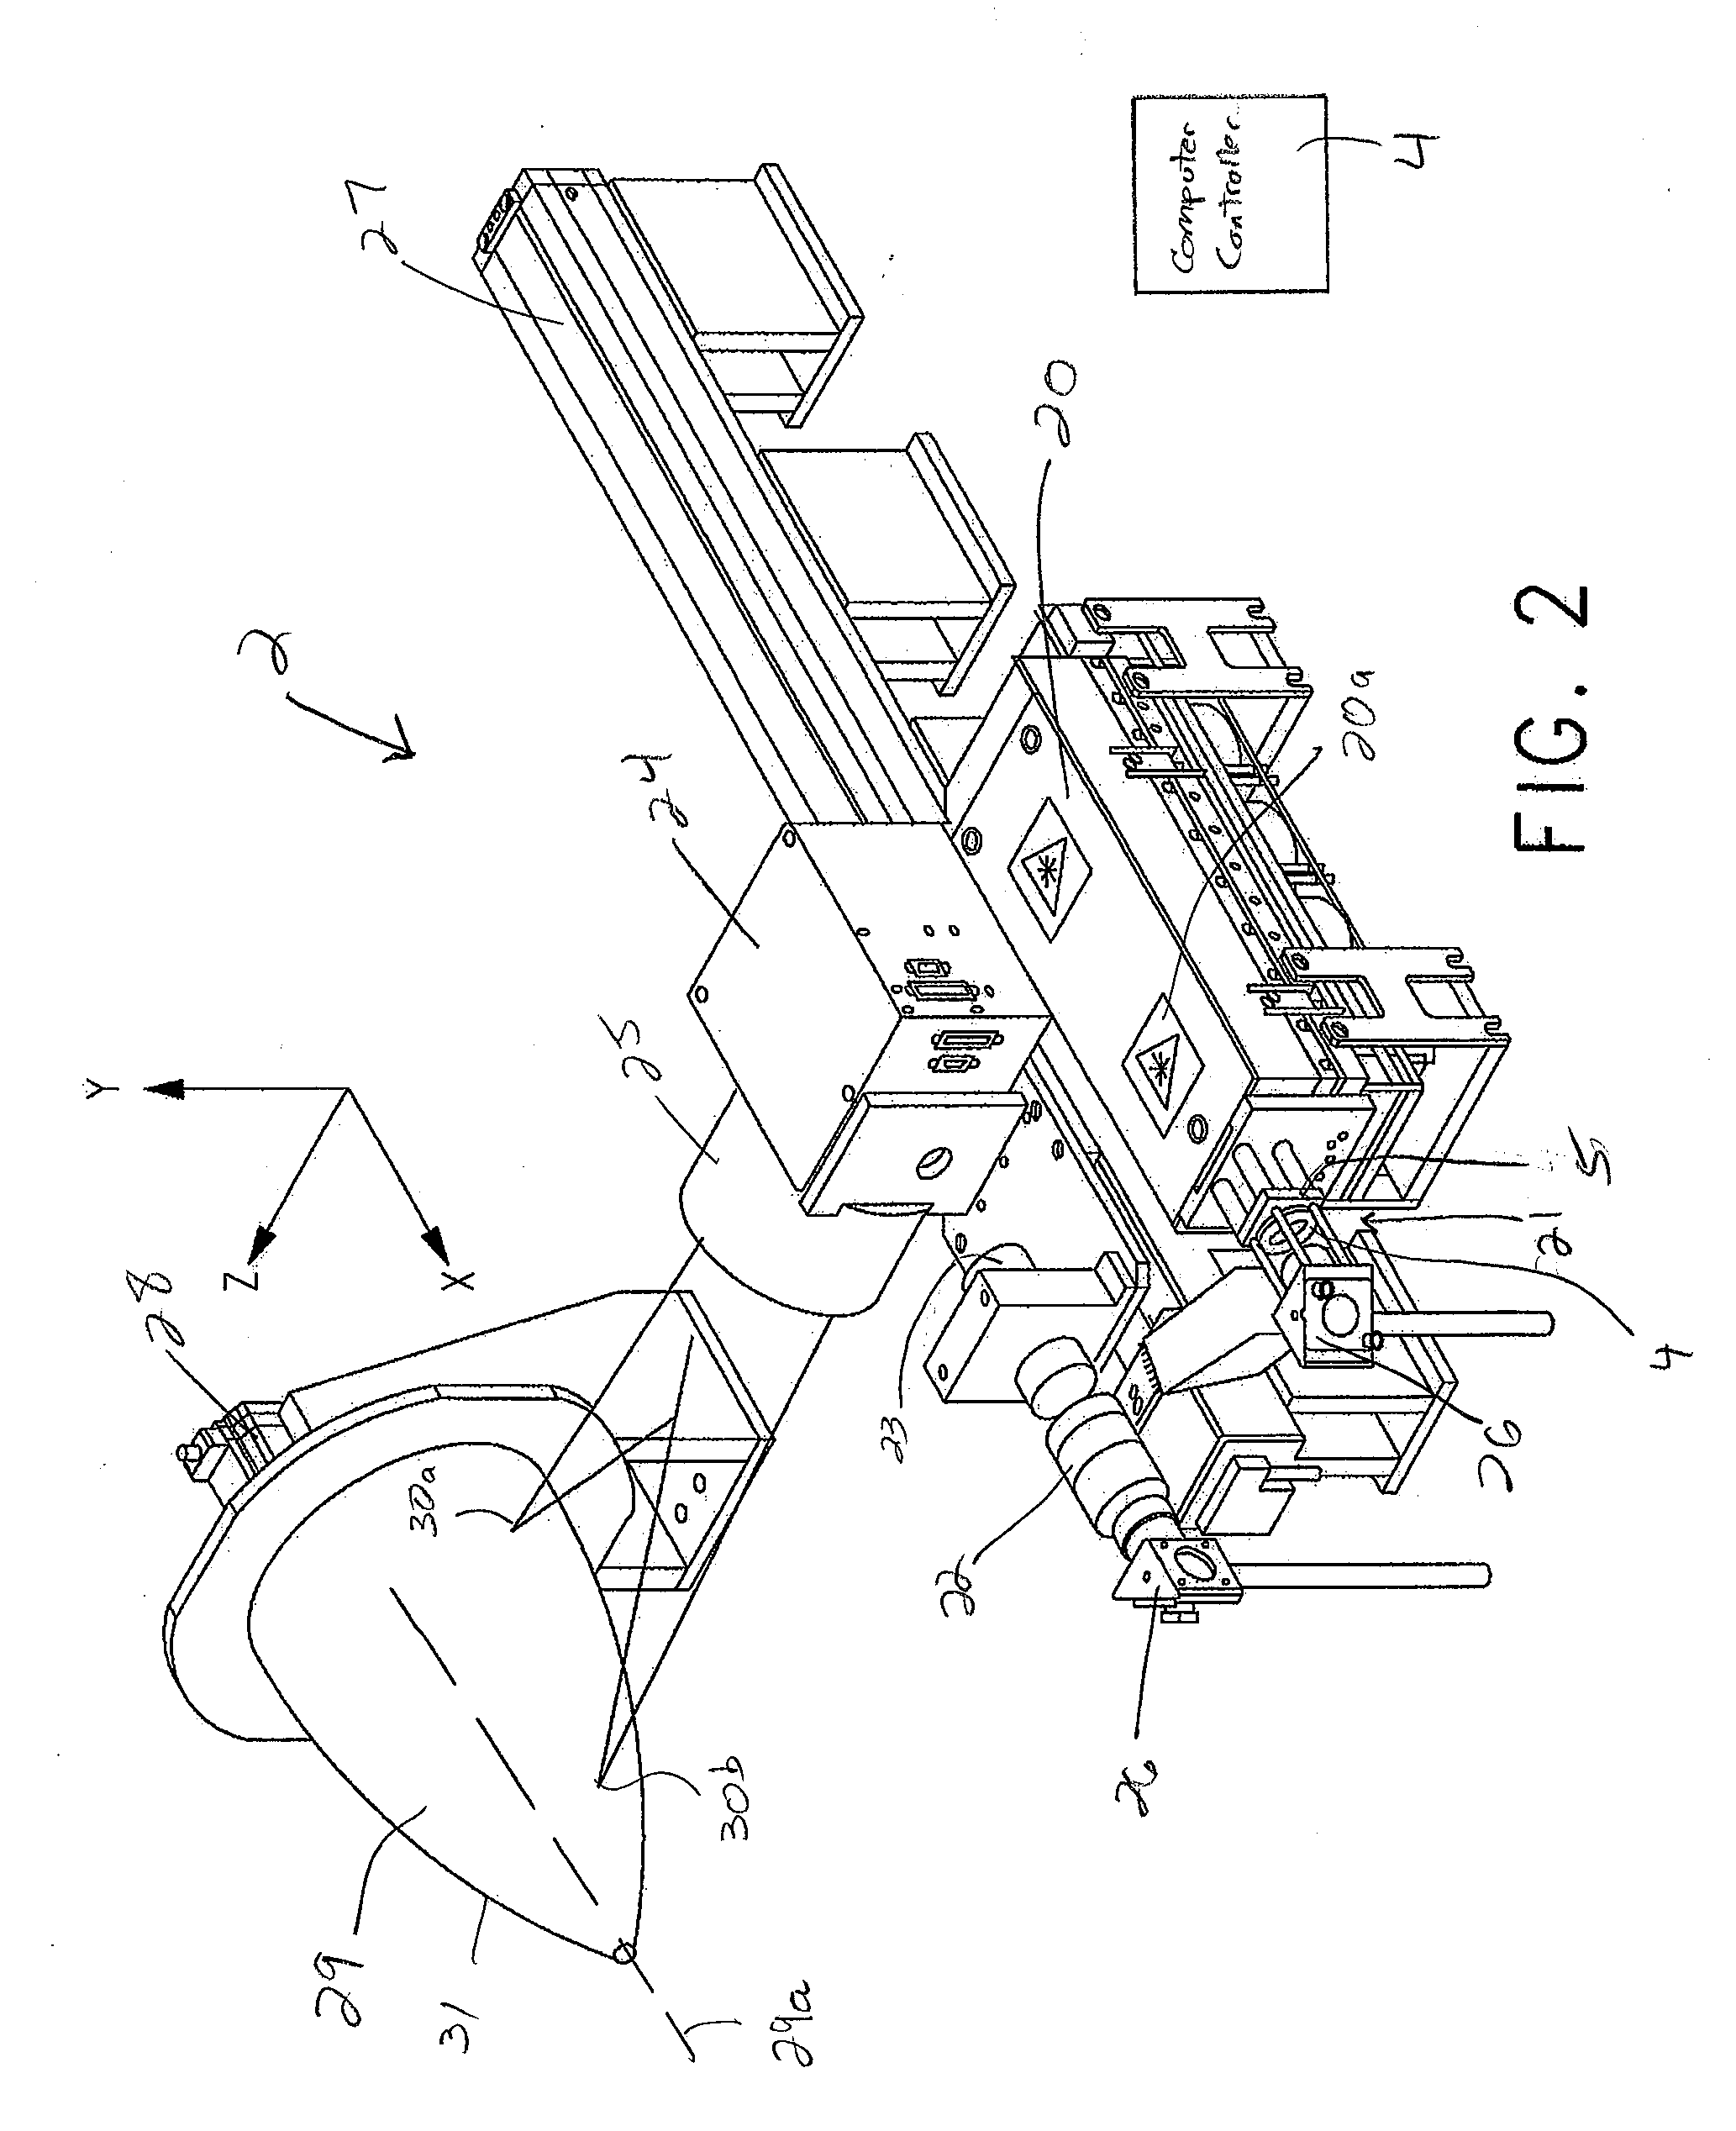 3D Direct Write Patterning Apparatus and Method of Generating Patterns on Doubly-Curved Surfaces